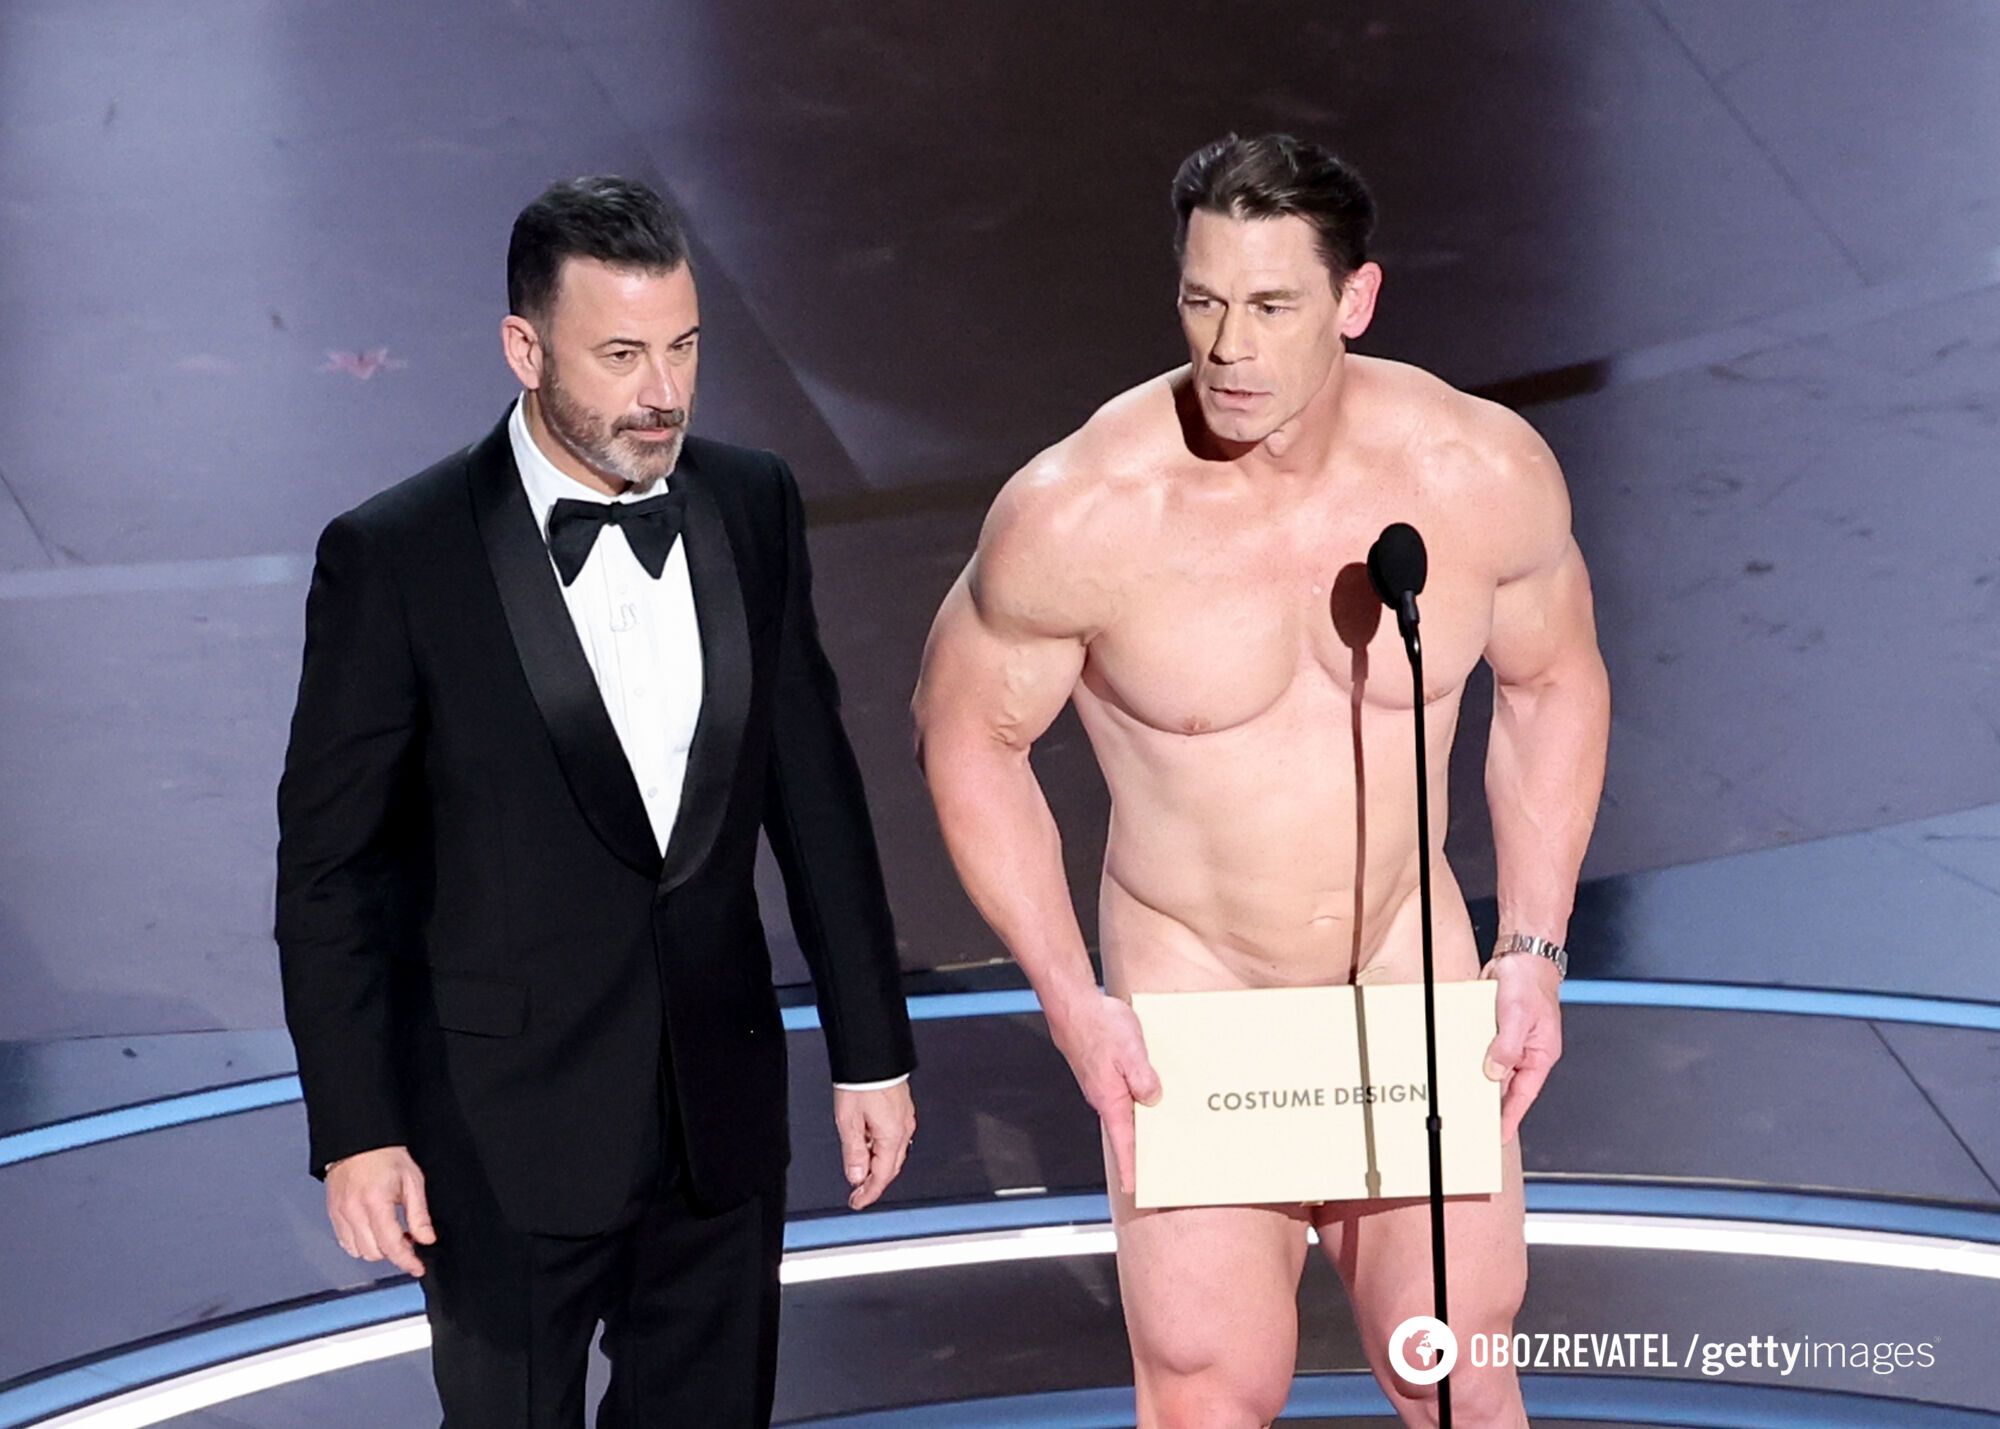 Wrestler-actor John Cena took to the Oscars stage completely naked: and here's why. Photo